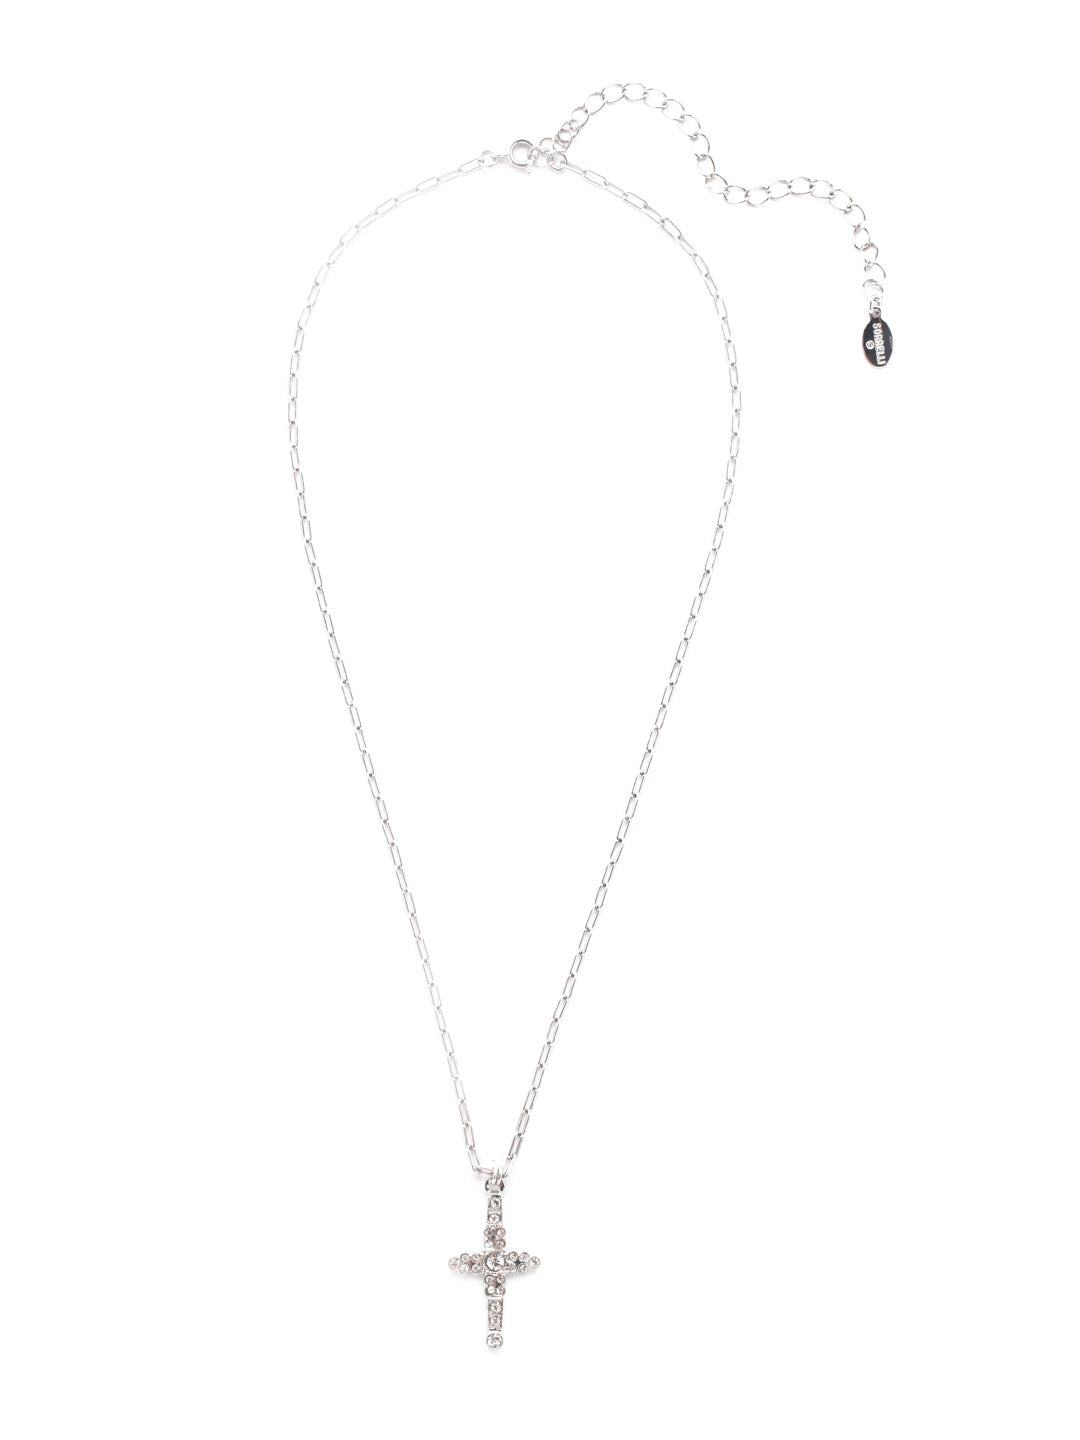 Bridget Cross Pendant Necklace - NEX4PDCRY - <p>Dainty and delicate, The Bridget Cross Pendant Necklace is the perfect wardrobe staple. A small cross pendant covered in crystals hangs prominently on an adjustable chain. From Sorrelli's Crystal collection in our Palladium finish.</p>